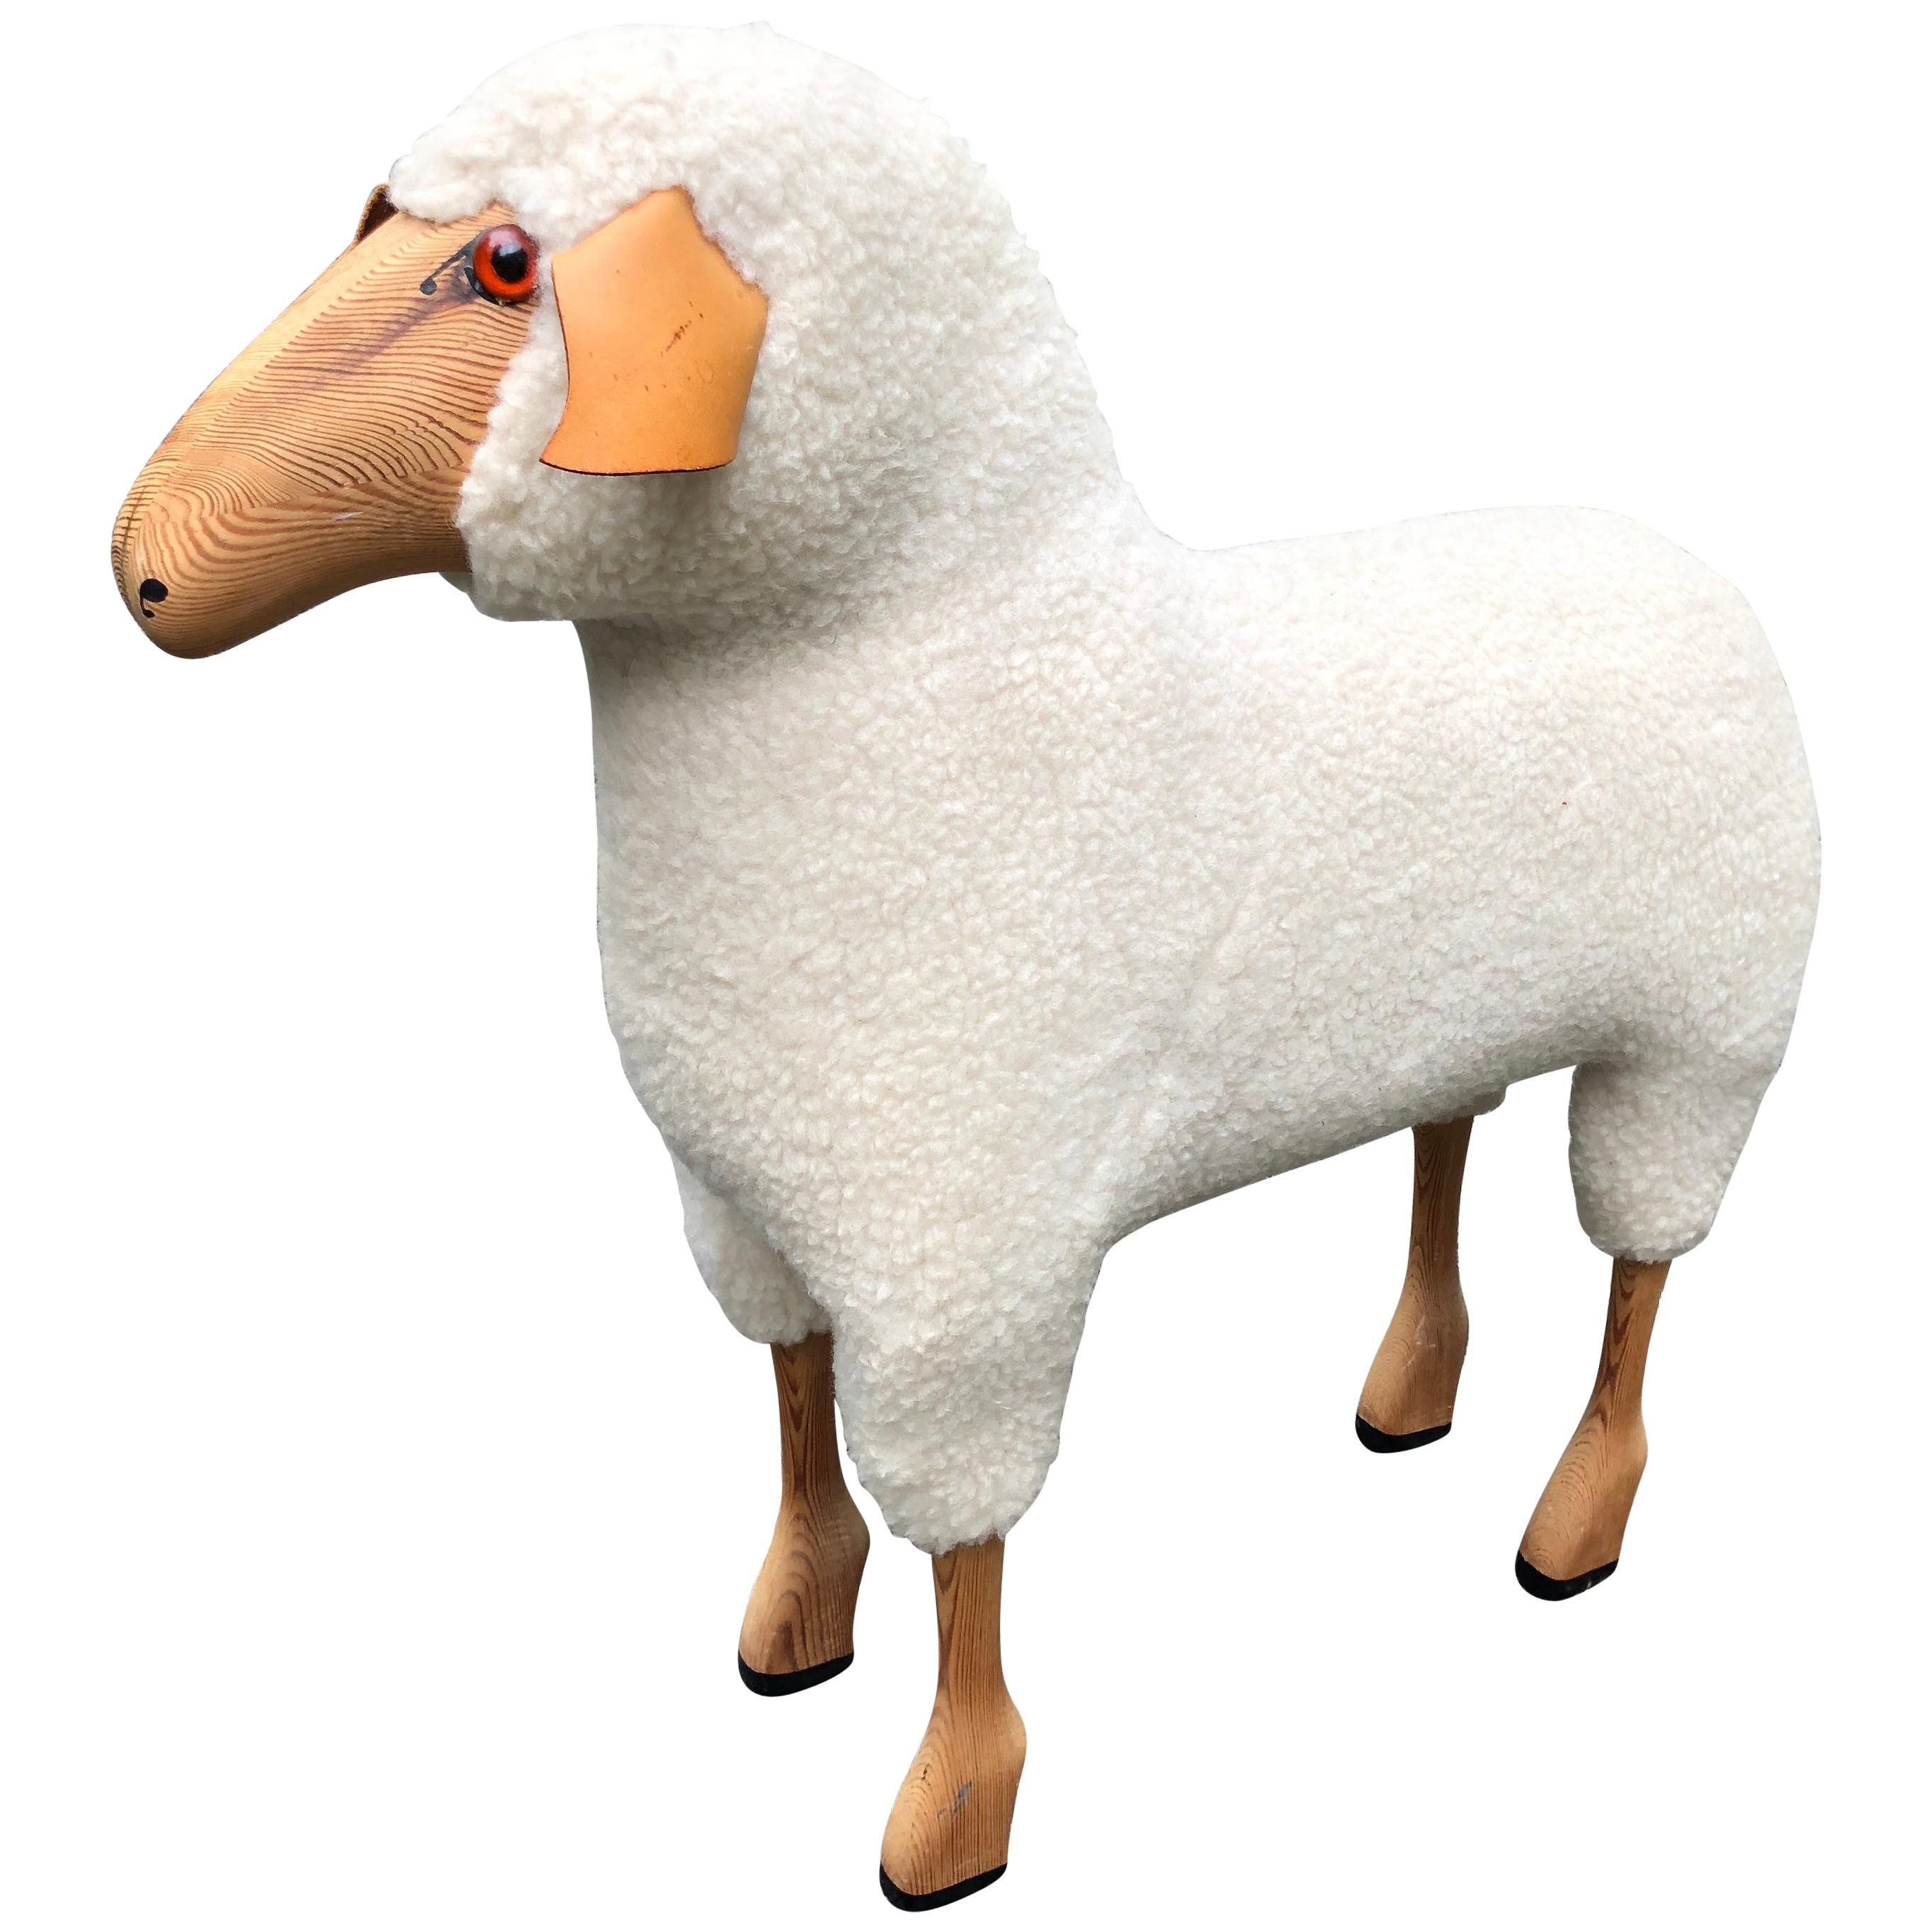 Whimsical Life-Size Sheep Sculpture